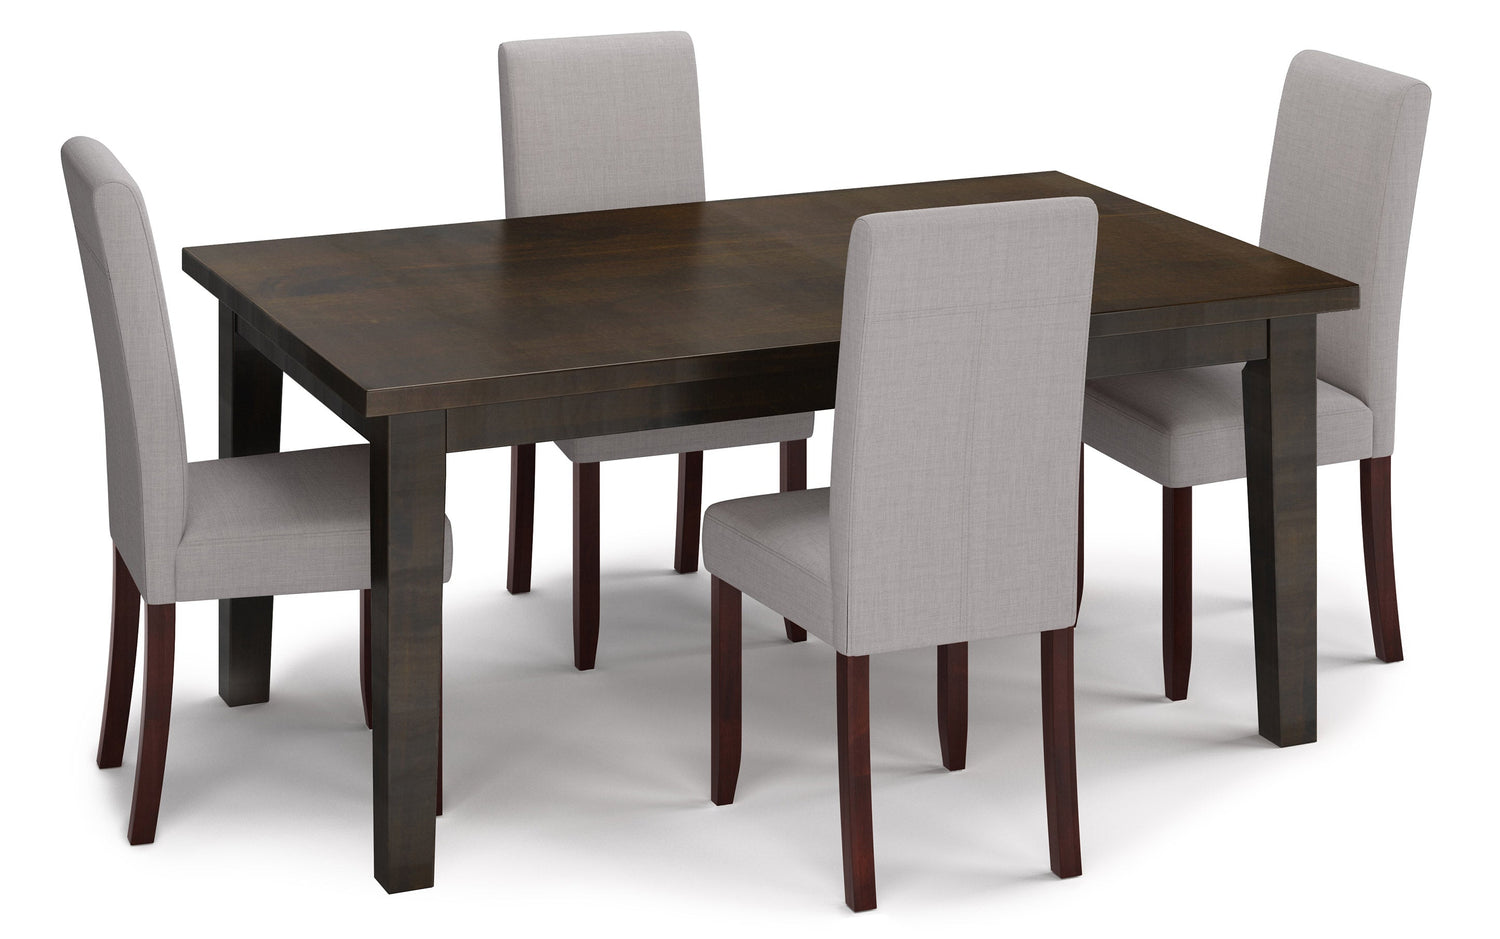 Dove Grey Linen Style Fabric | Acadian 5 Piece Dining Set